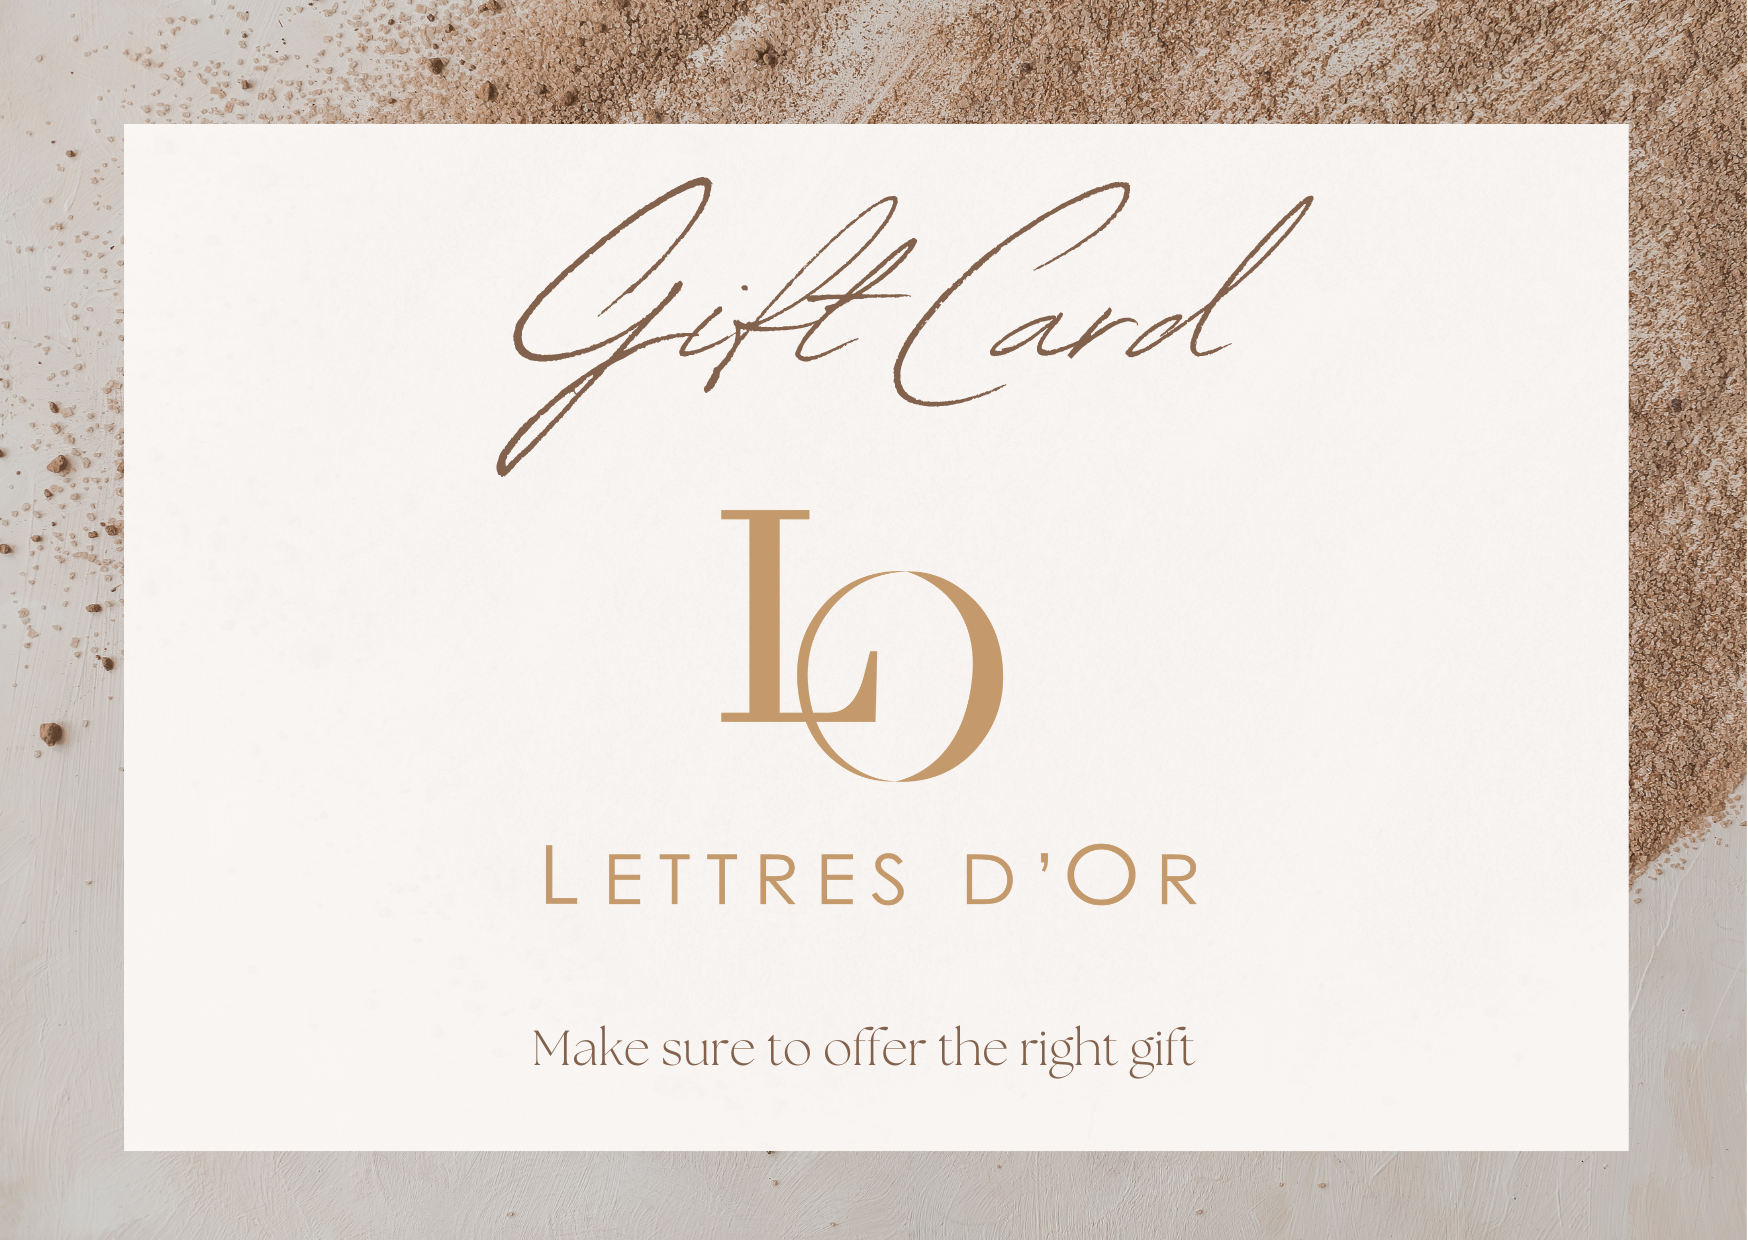 Lettres d'Or Gift Card